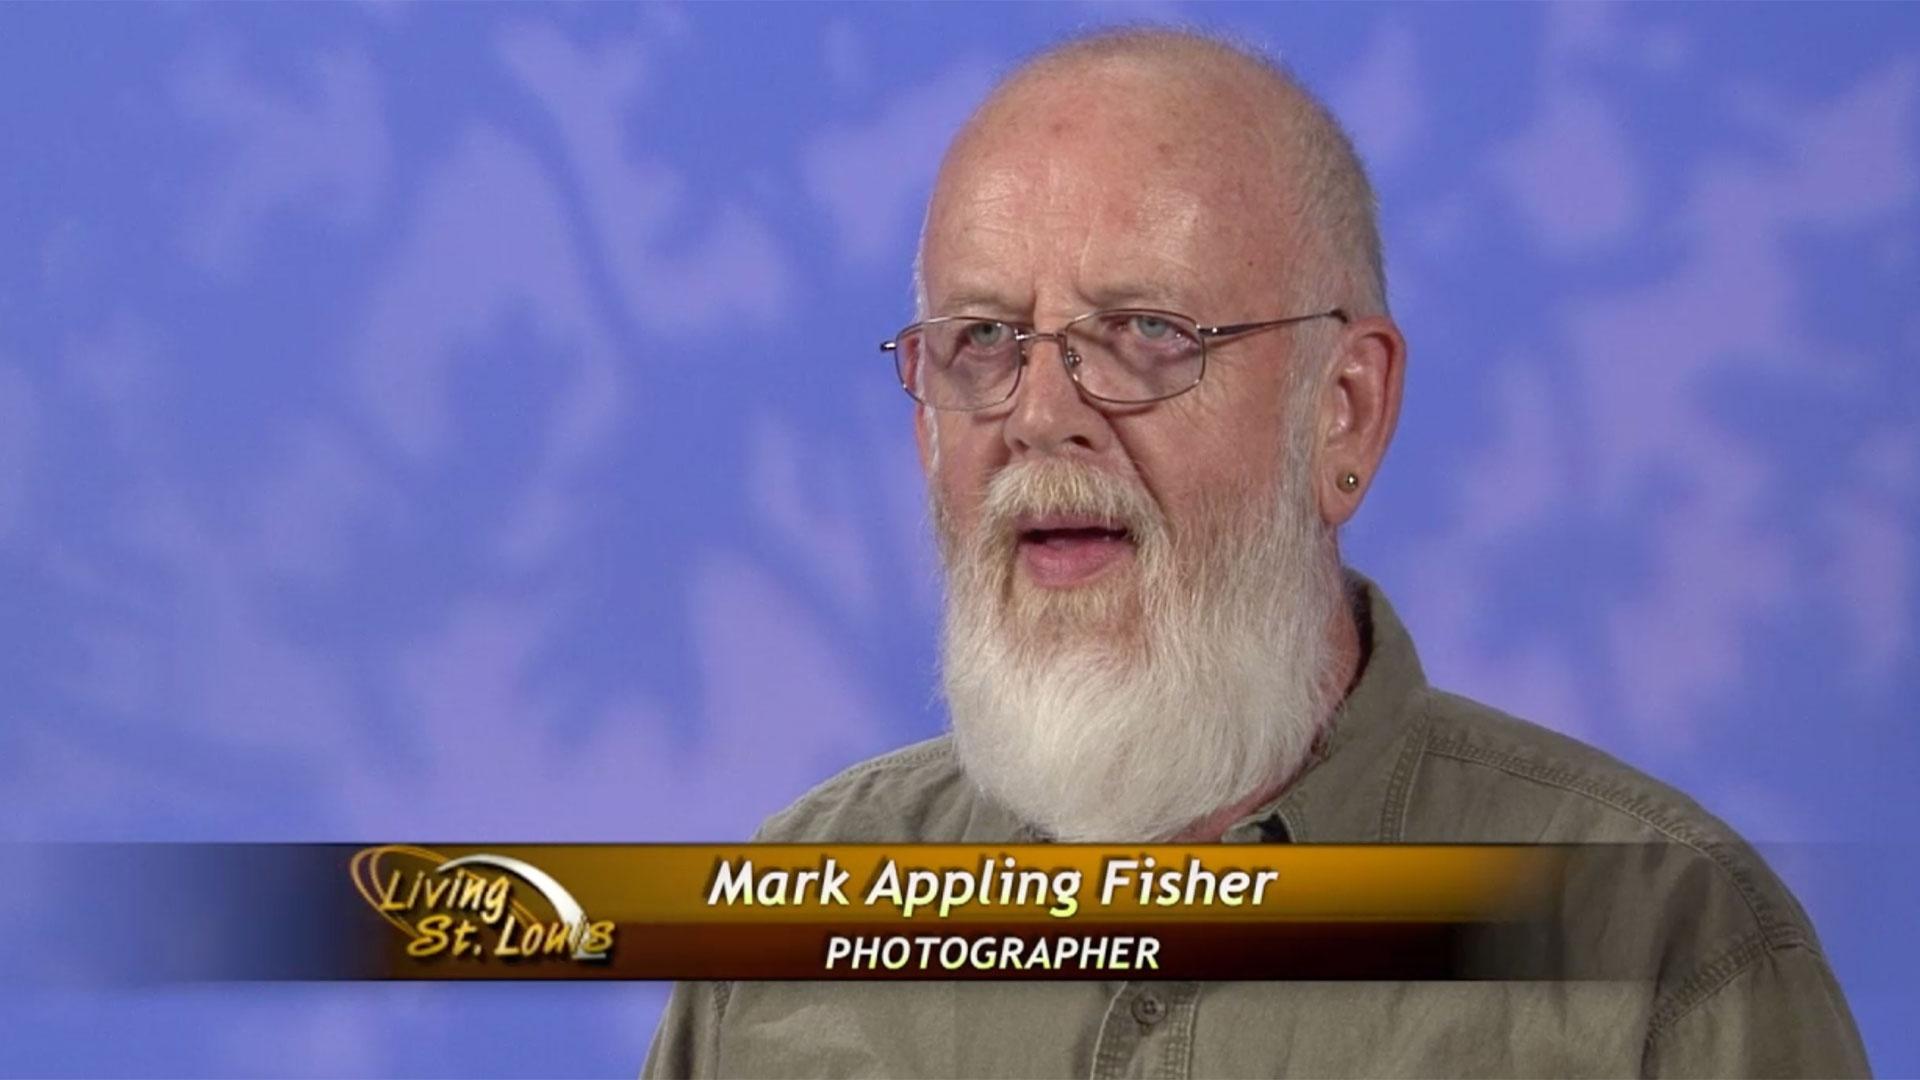 Photographer Mark Appling Fisher | Living St. Louis | PBS